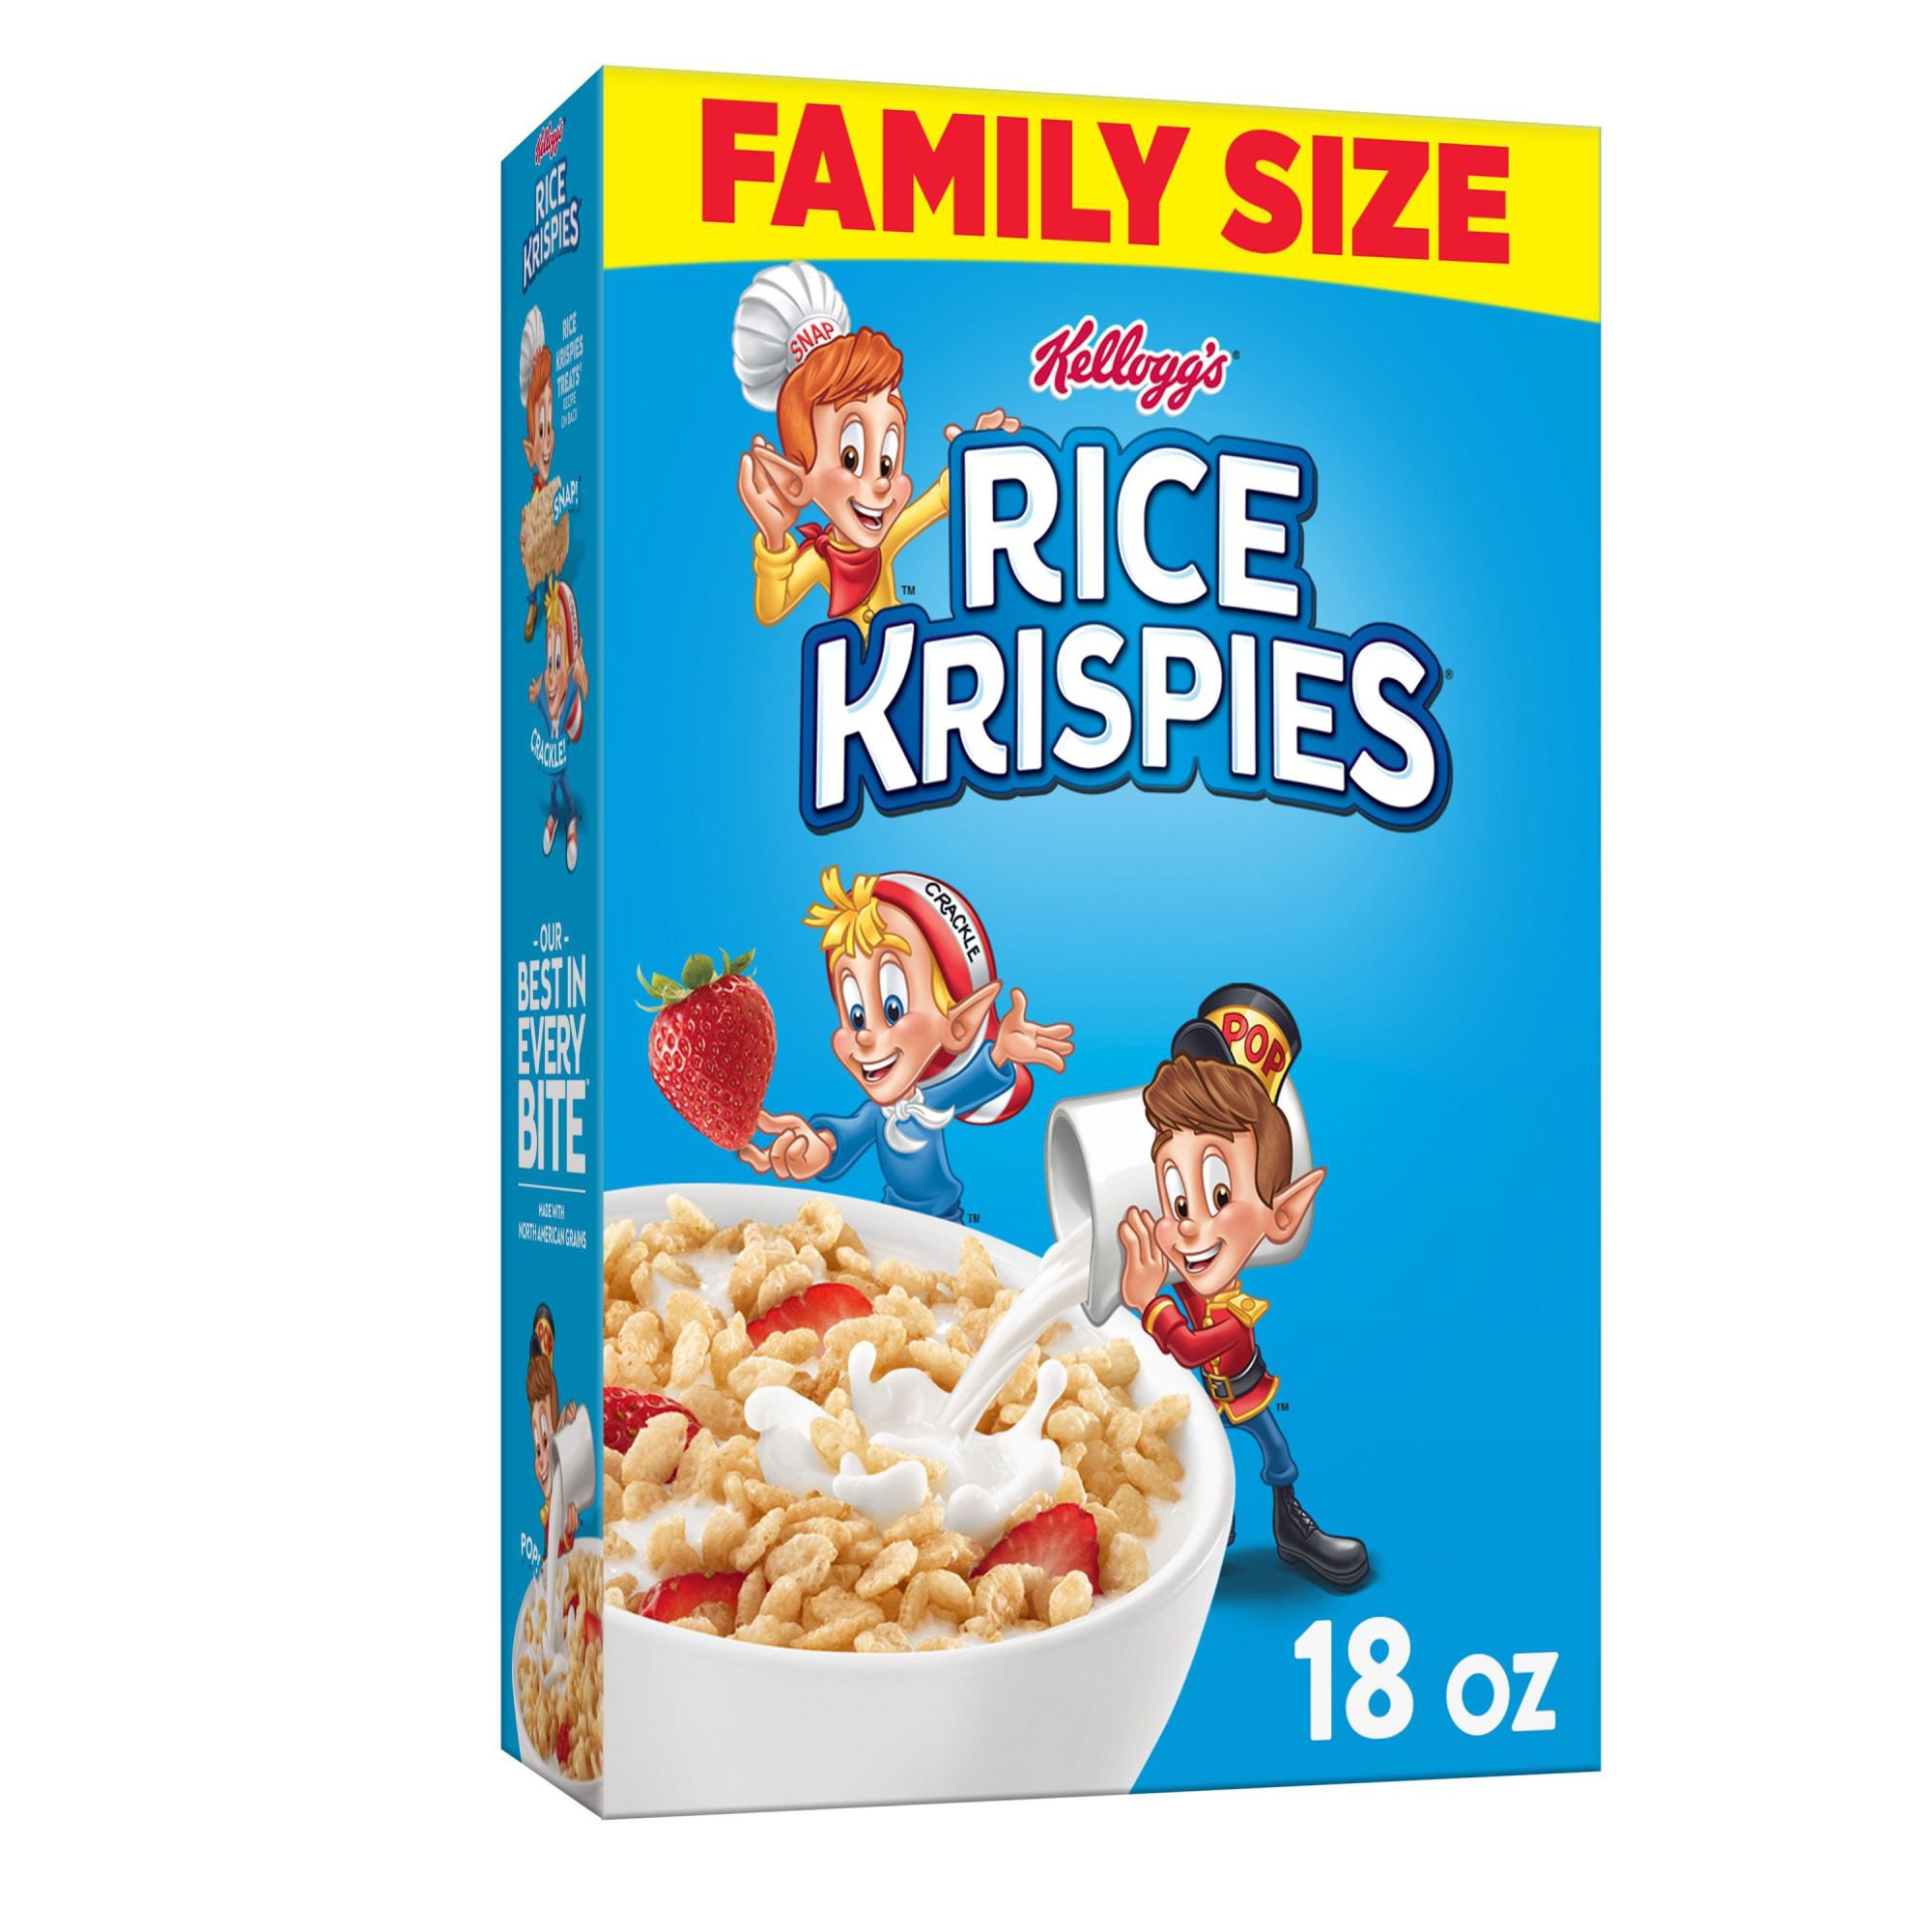 rice cereal